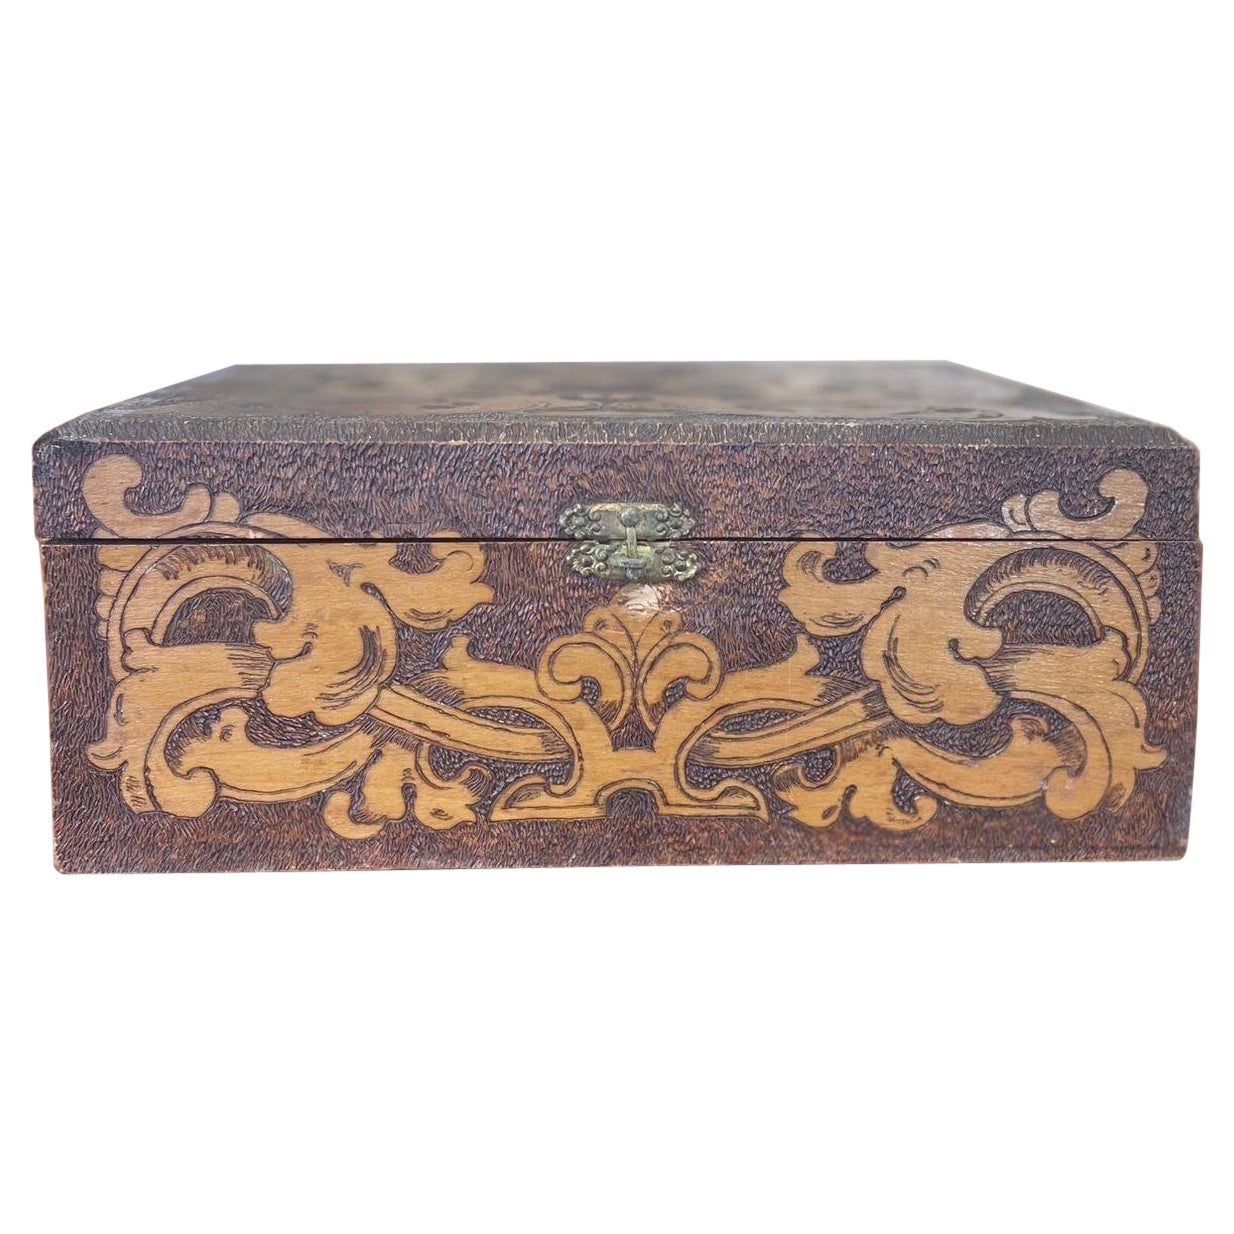 Wooden Box With Pyrography Mosaic and Hinge Clasp. For Sale